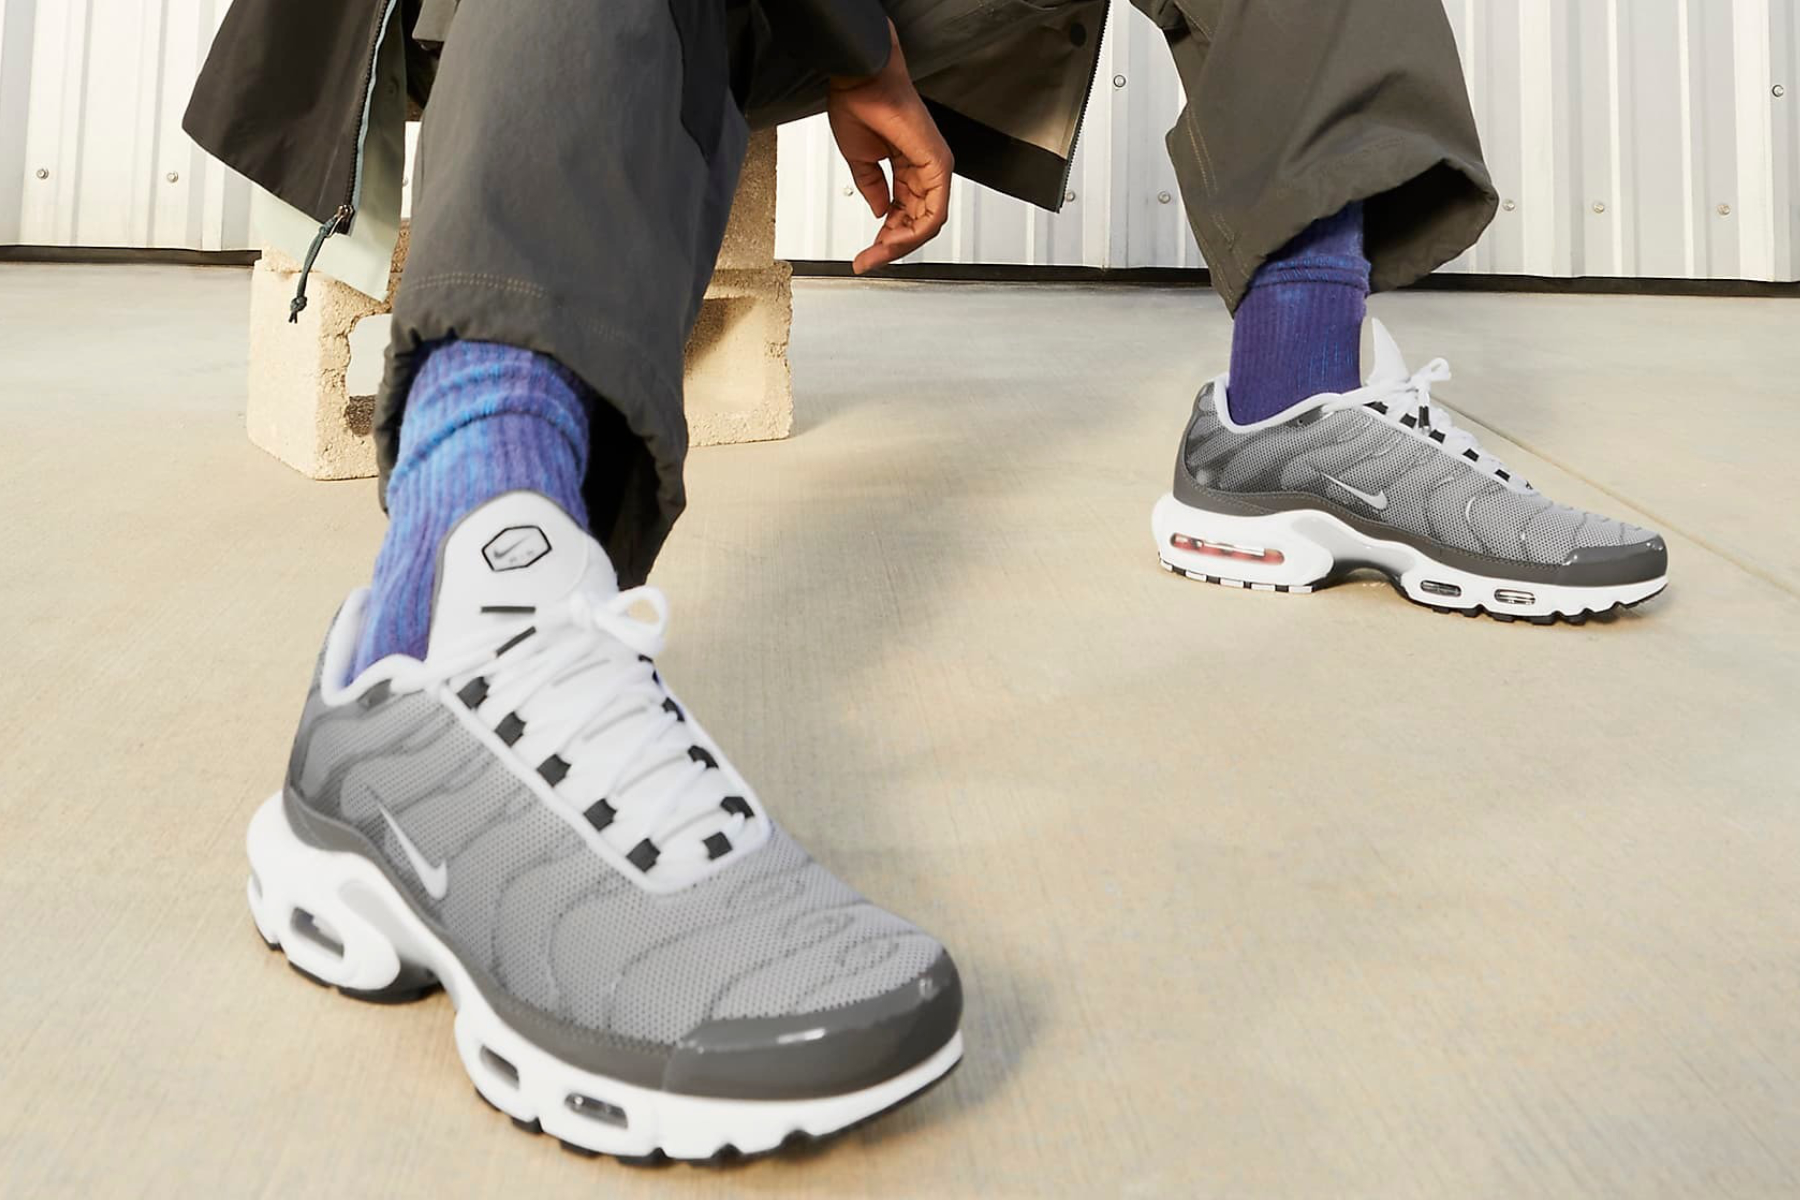 Nike's TN sneaker is being adopted by the elderly.